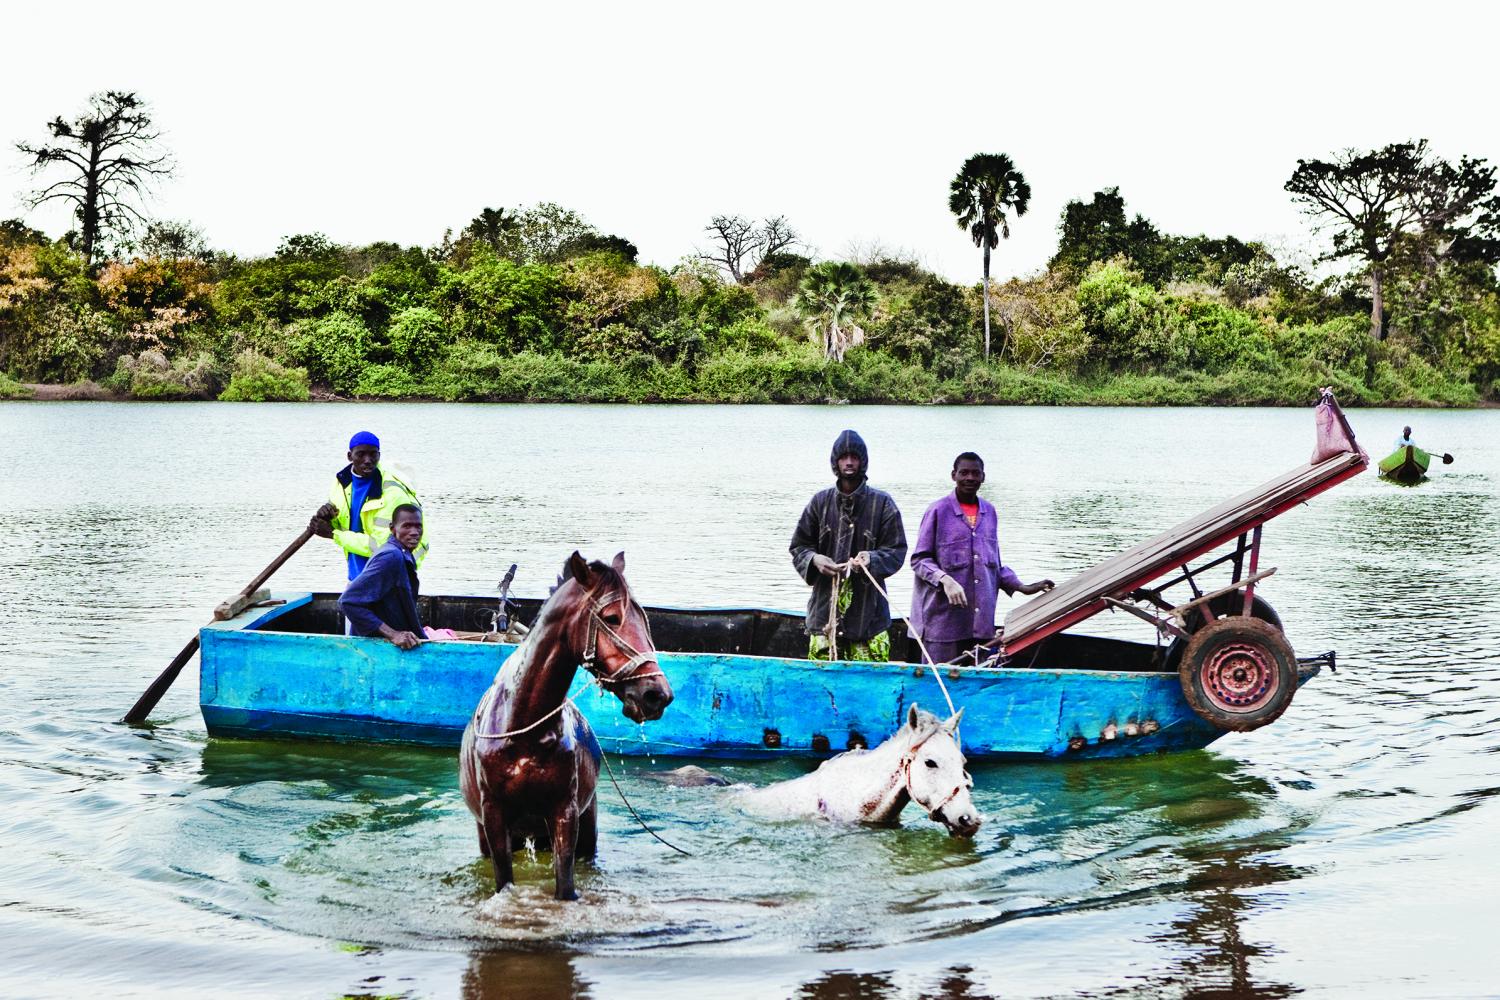 Men from the Fula Tribe swim their horses across the Gambia River on their way to market.